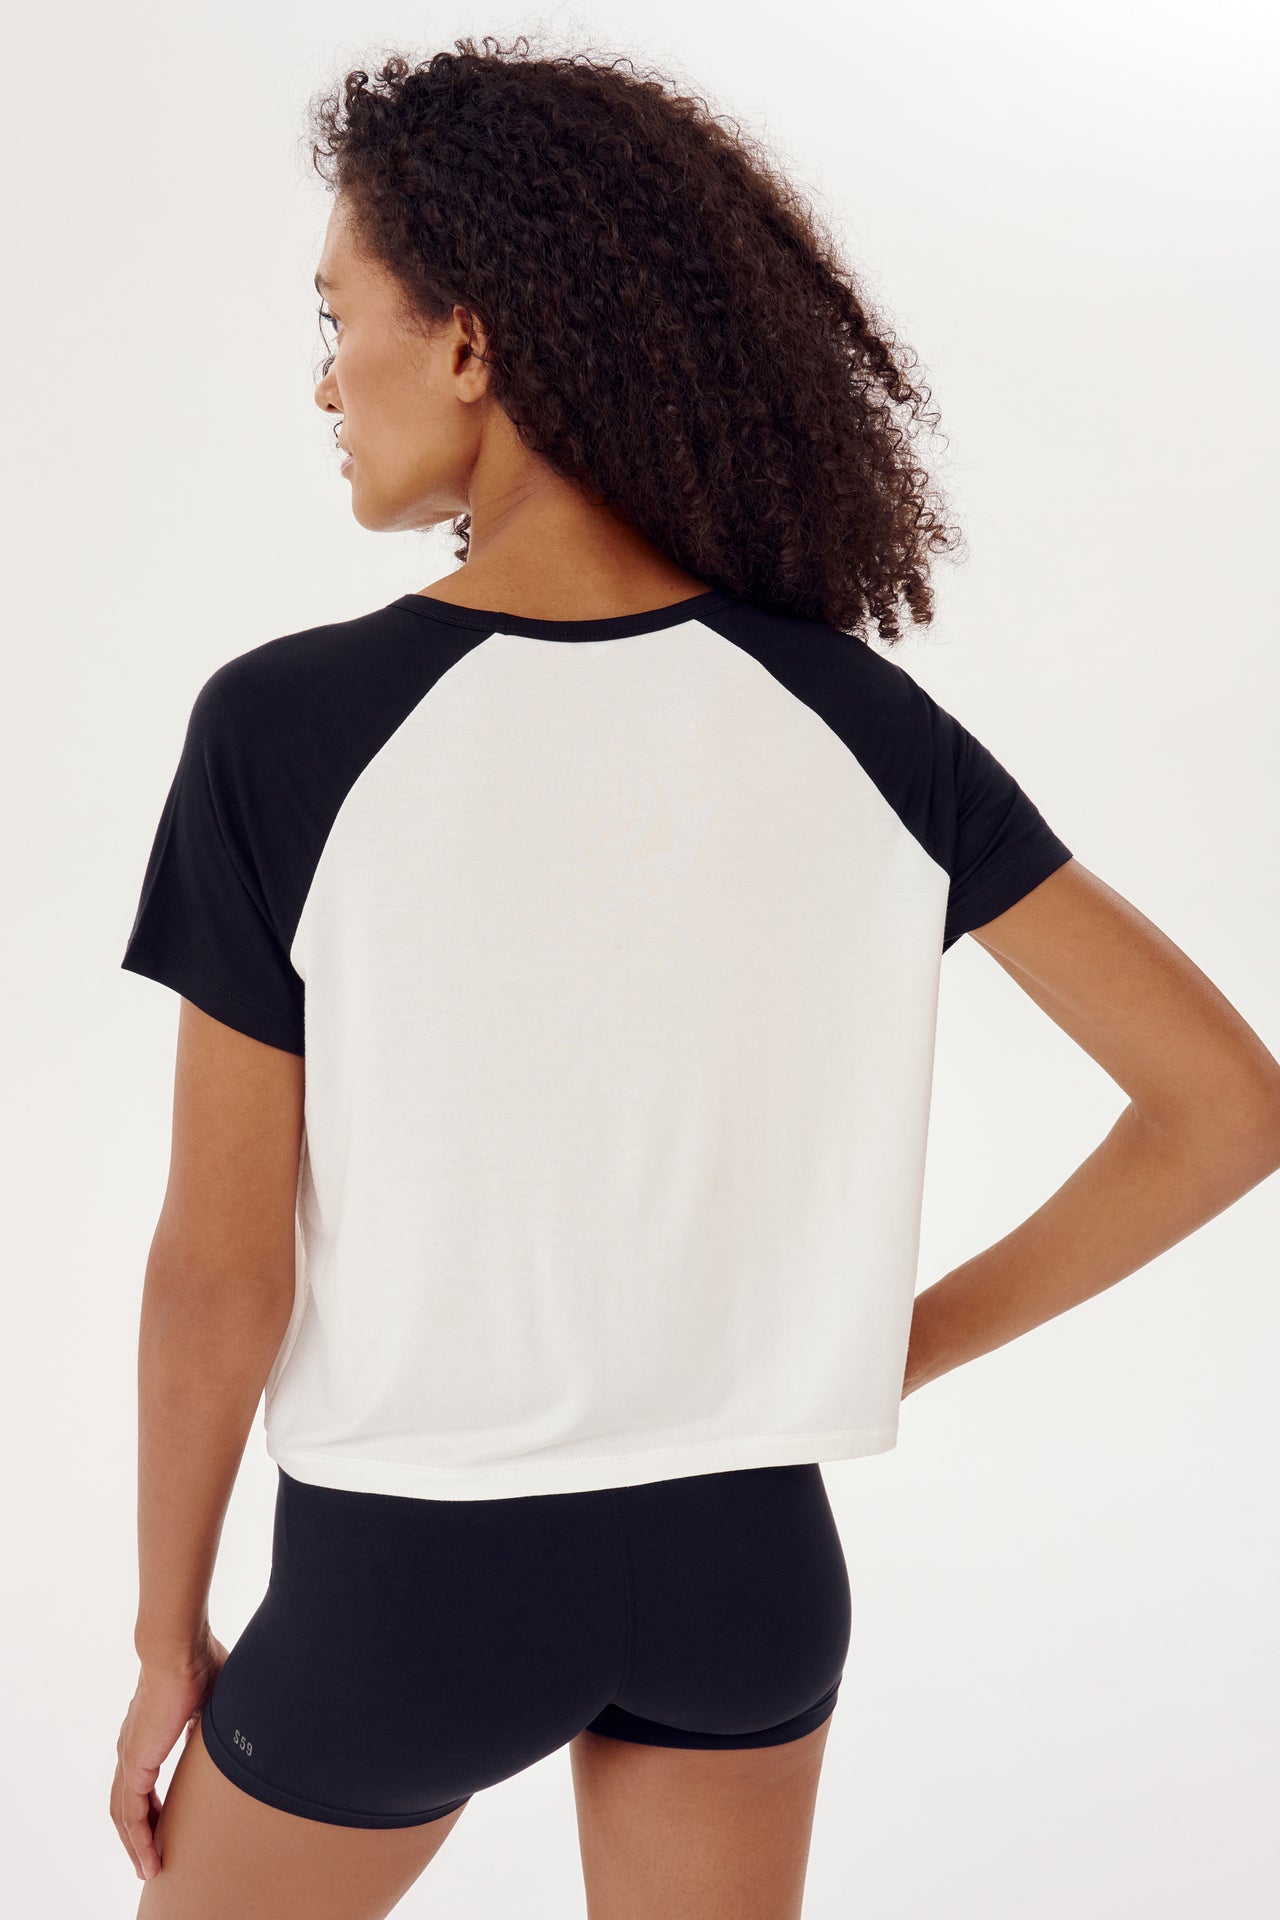 The back view of a woman wearing a SPLITS59 Baseball Jersey Tee in White/Black, perfect for relaxed fit gym workouts.